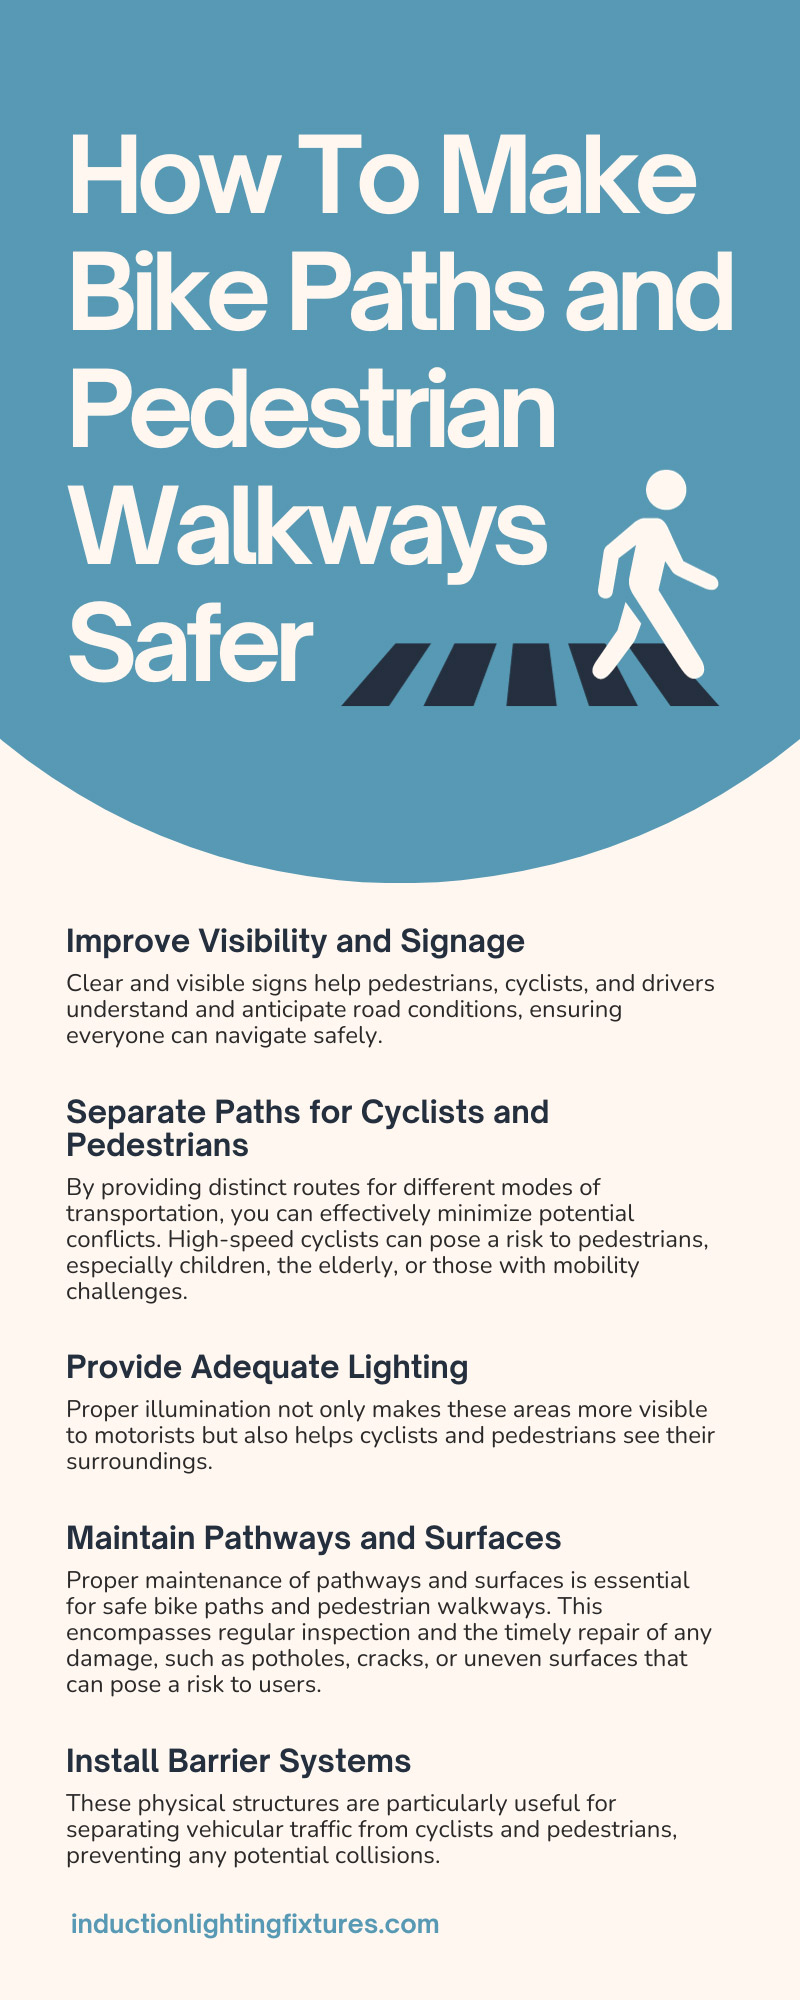 How To Make Bike Paths and Pedestrian Walkways Safer